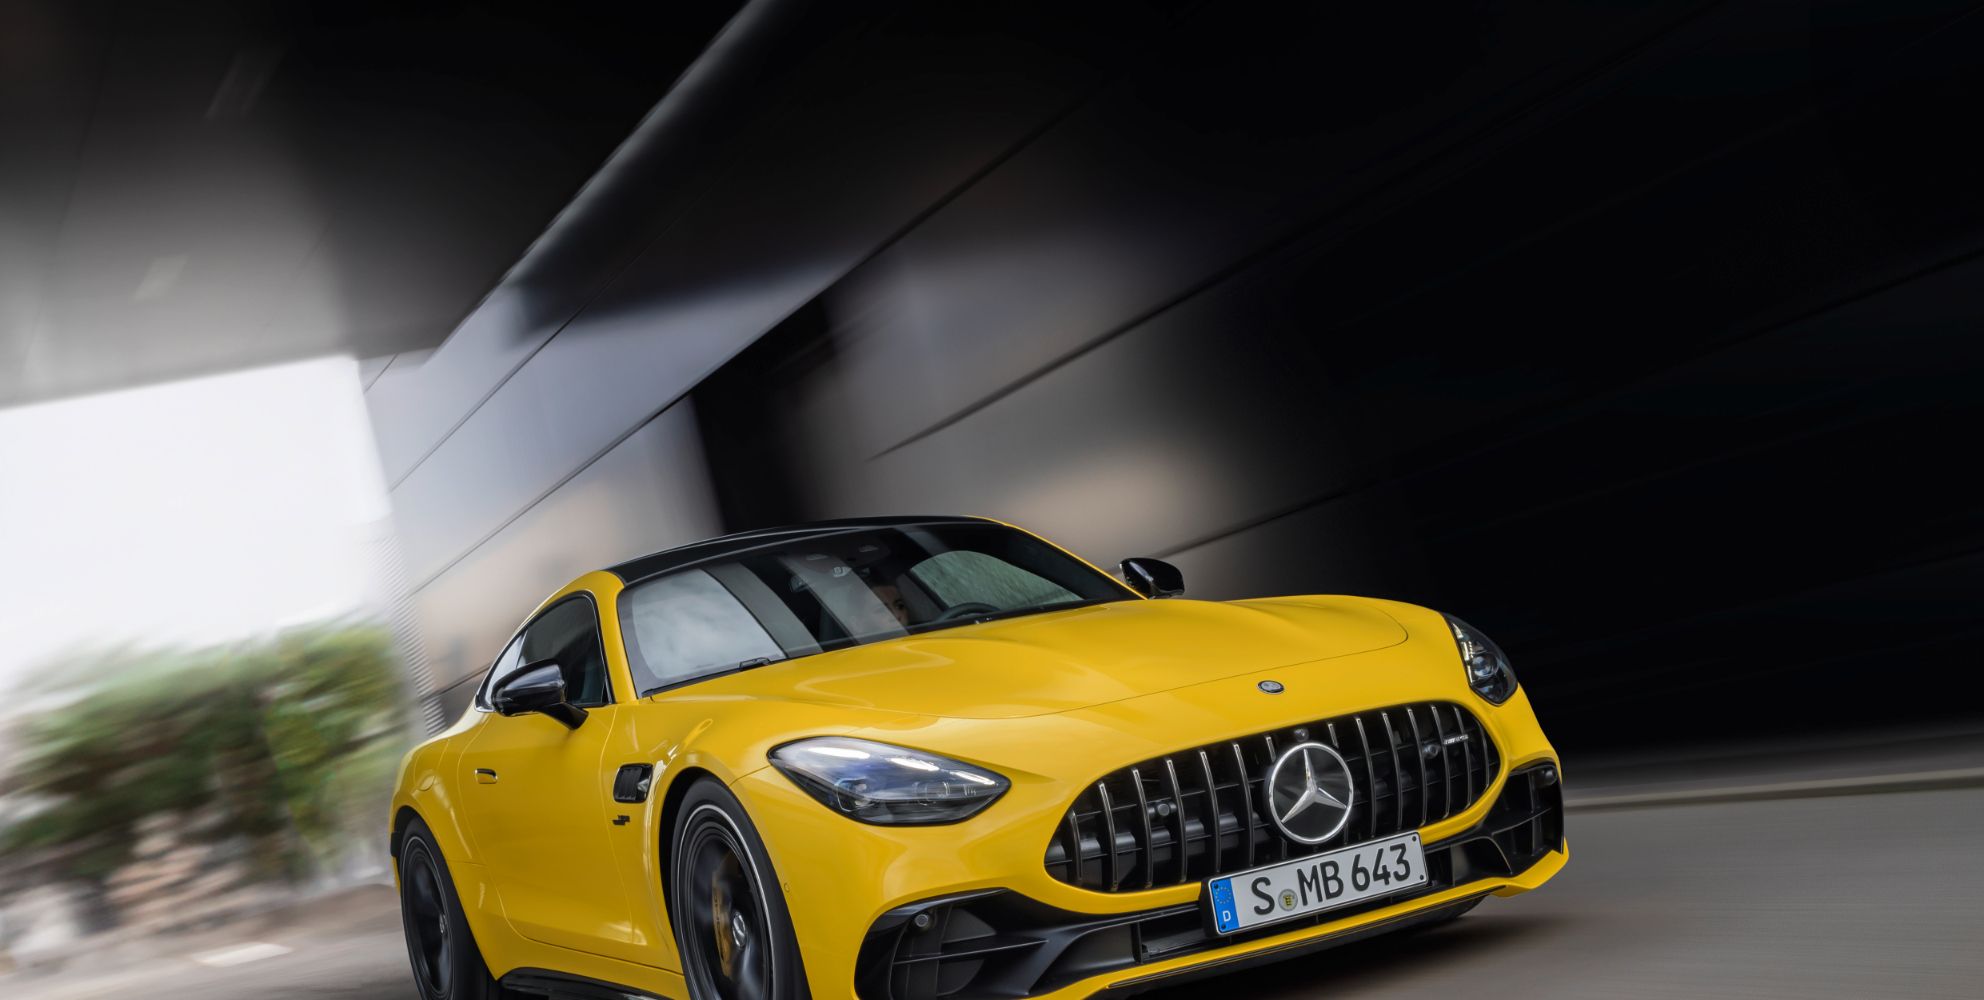 Mercedes-AMG Doubles Down on Grand Touring Coupes